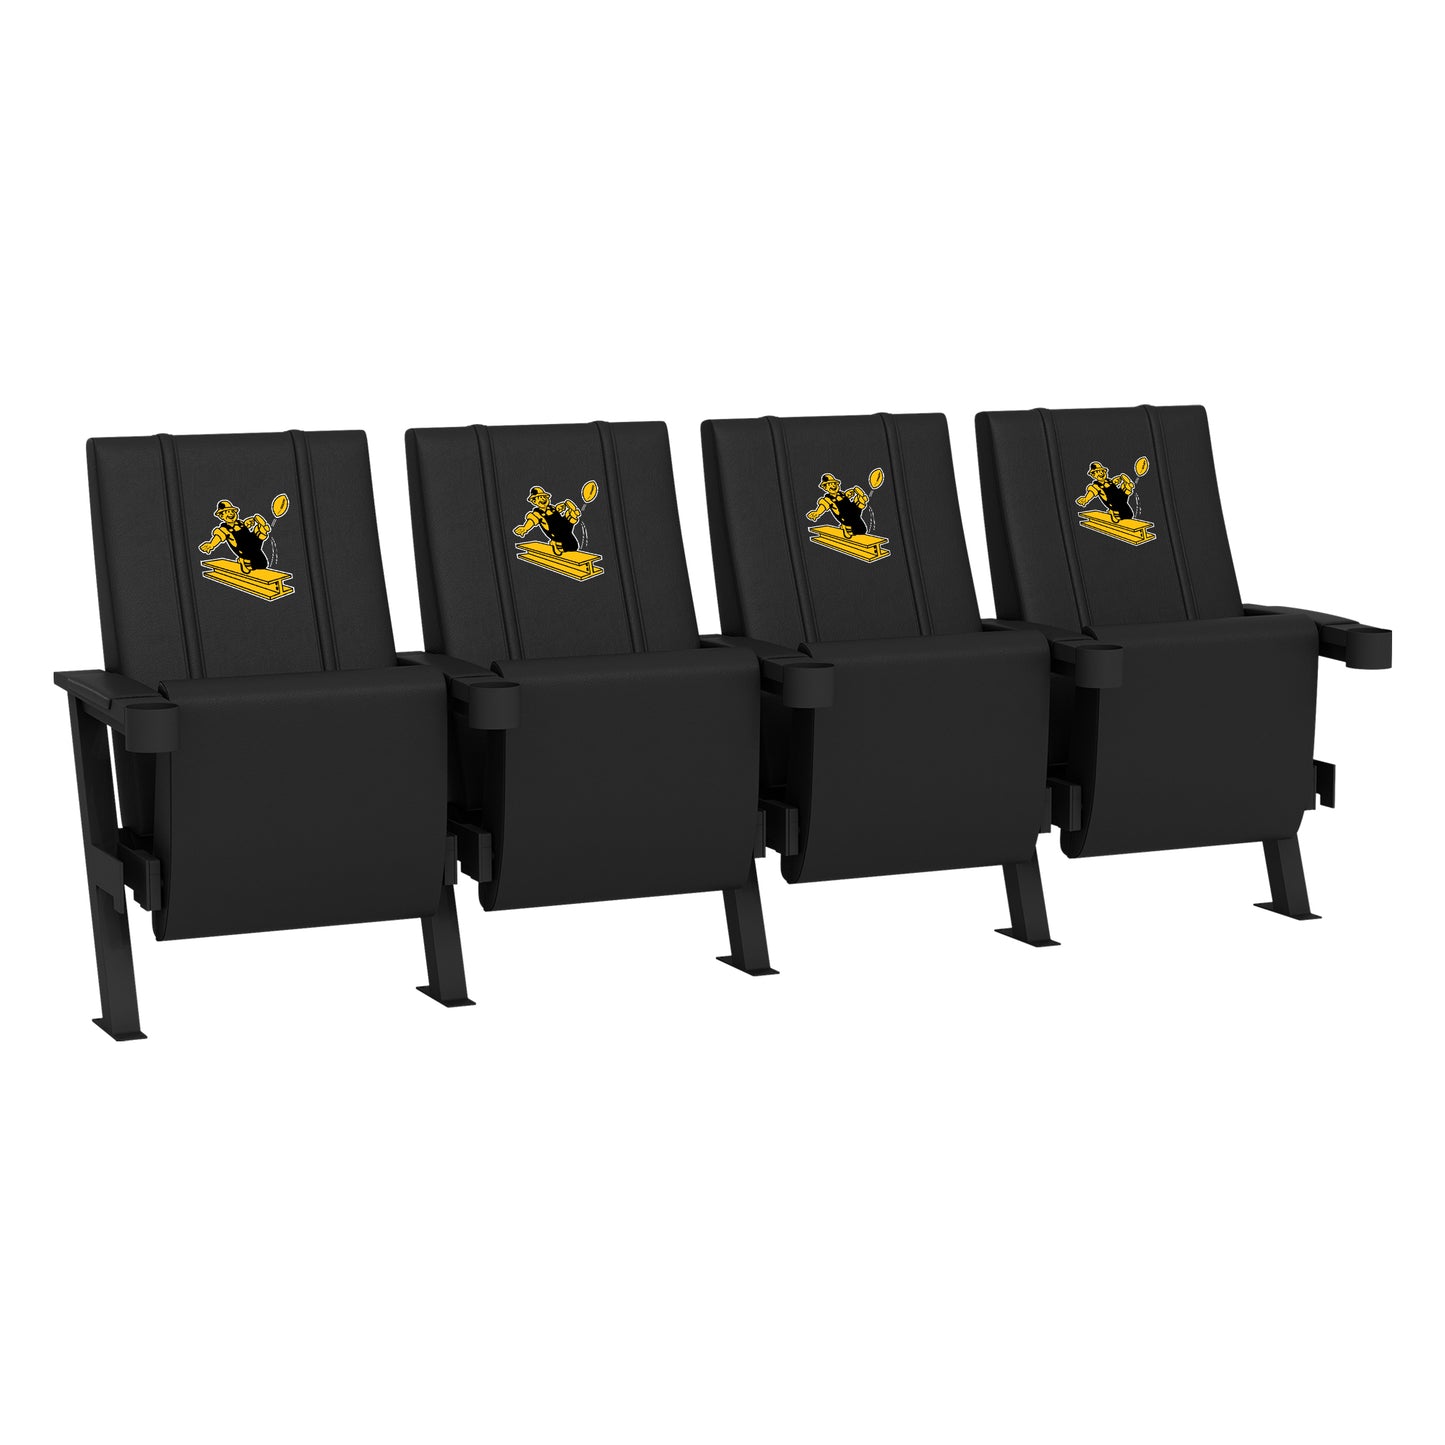 SuiteMax 3.5 VIP Seats with Pittsburgh Steelers Classic Logo